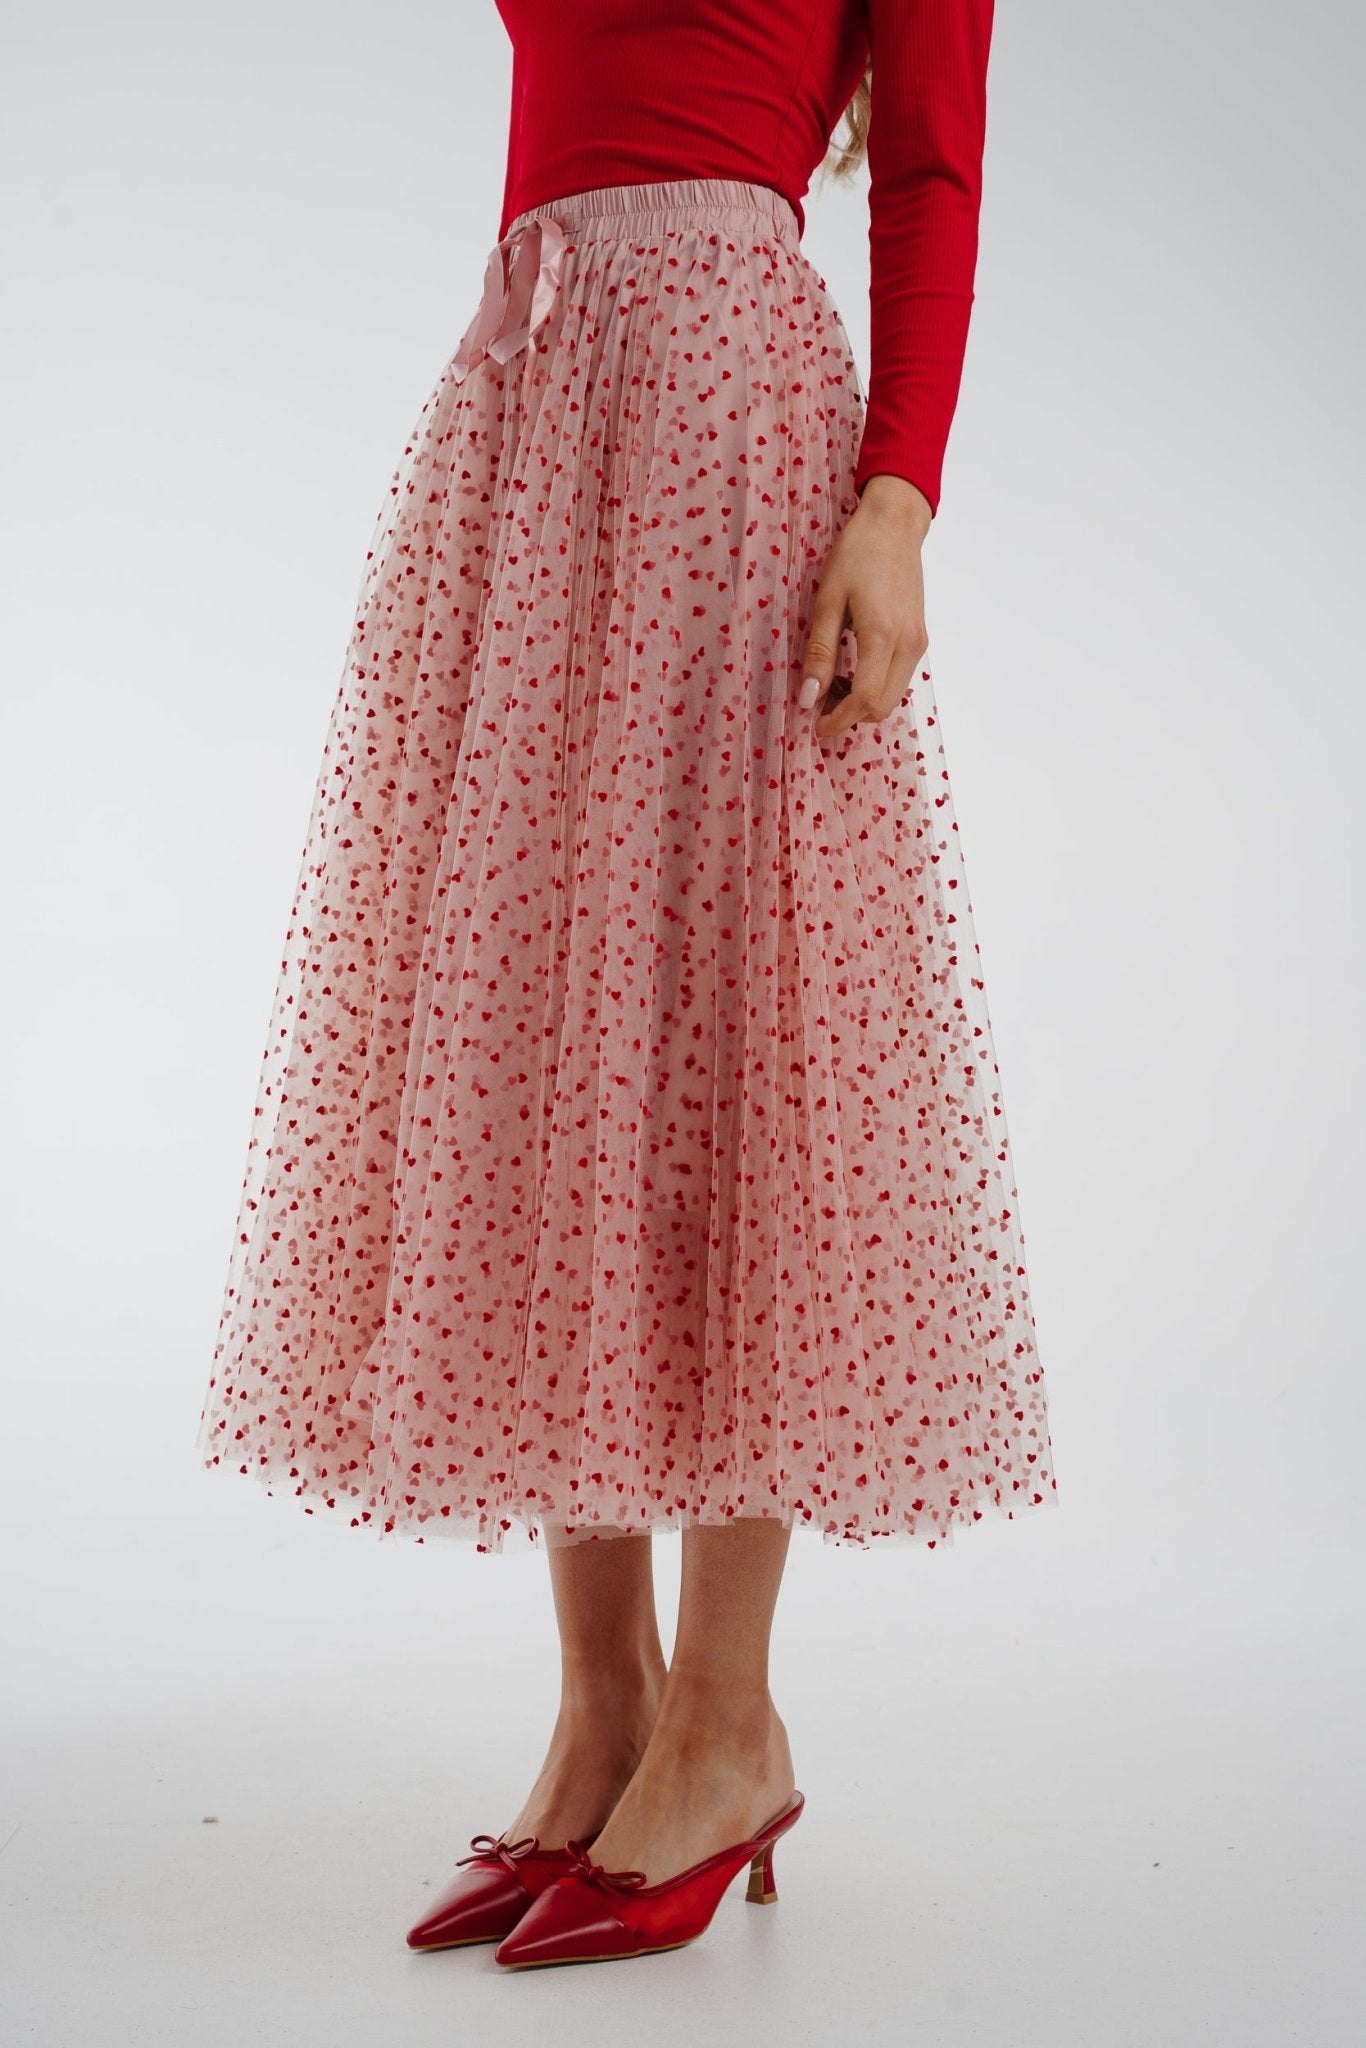 Polly Heart Print Tulle Skirt In Pink - The Walk in Wardrobe